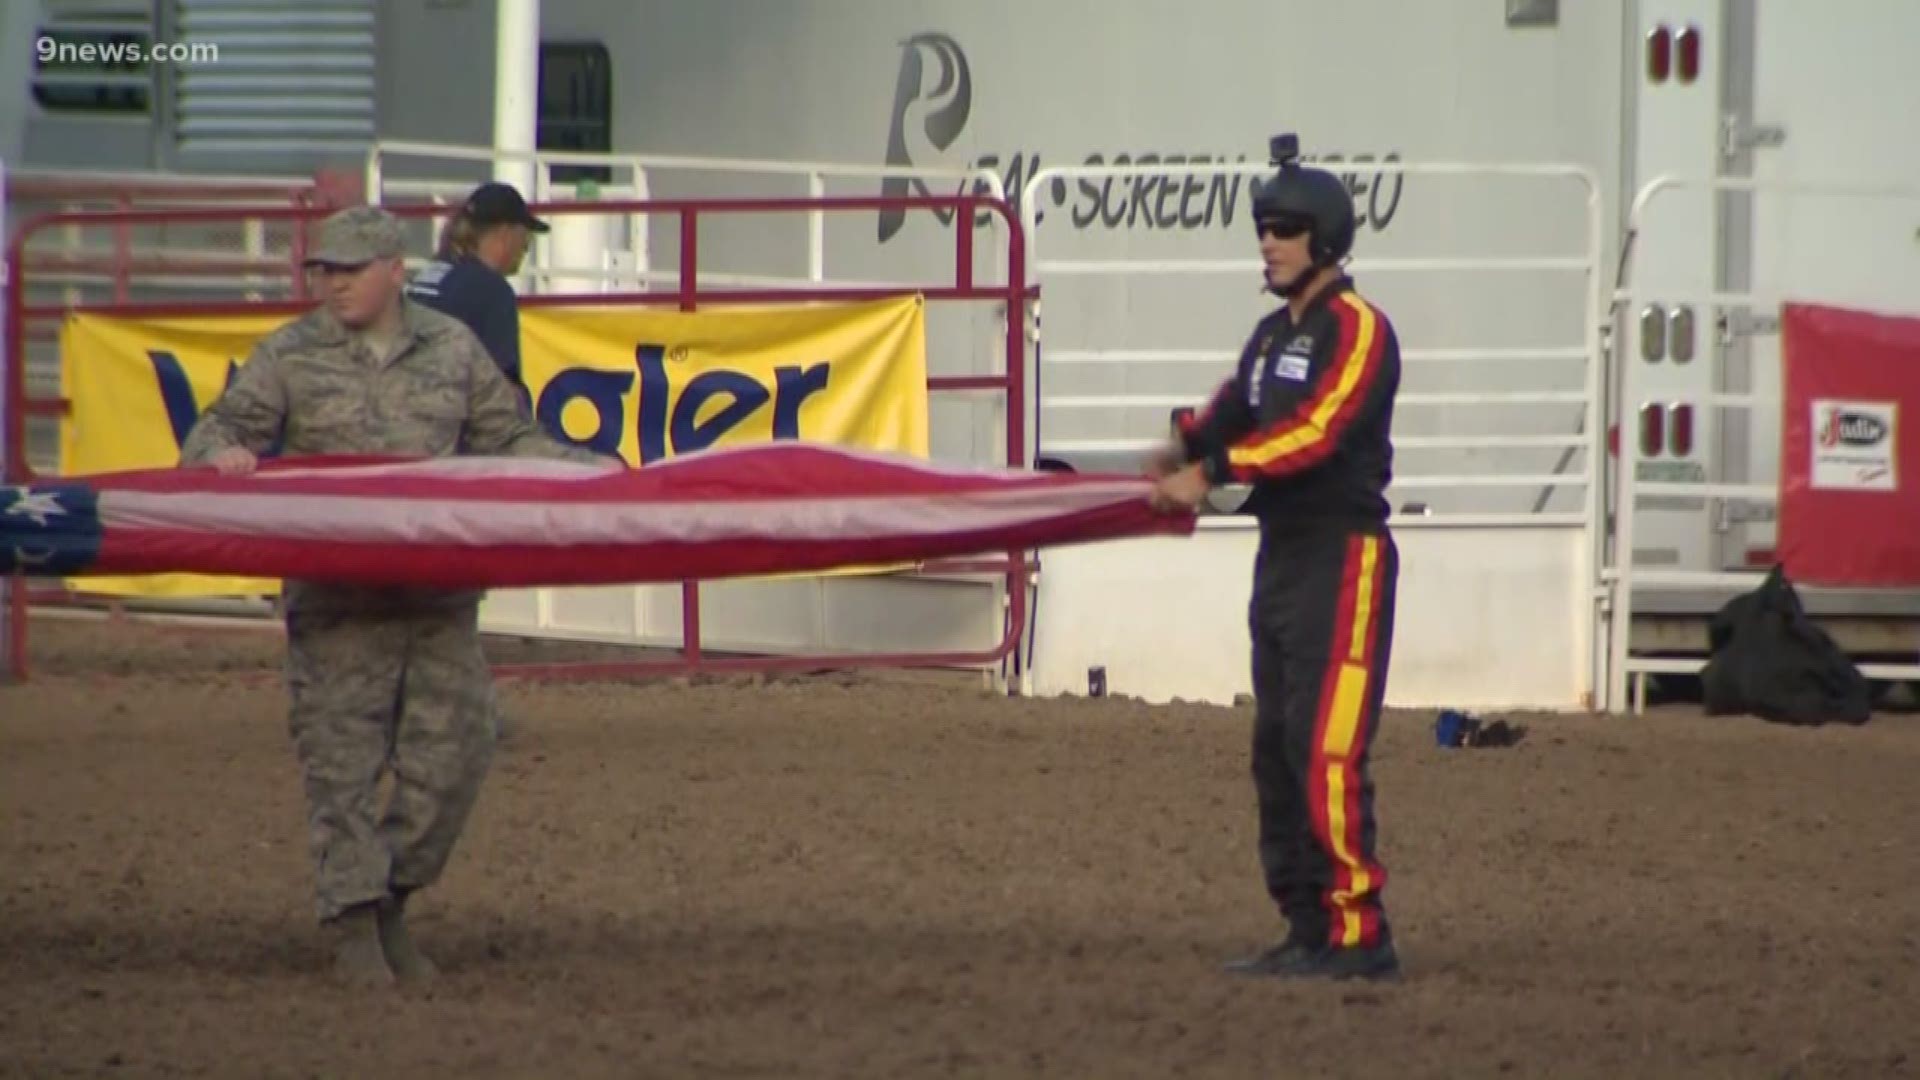 They travel the country, jumping into various events. 
Tonight, the all-veteran parachute team landed in Greeley for a special night at the Stampede.